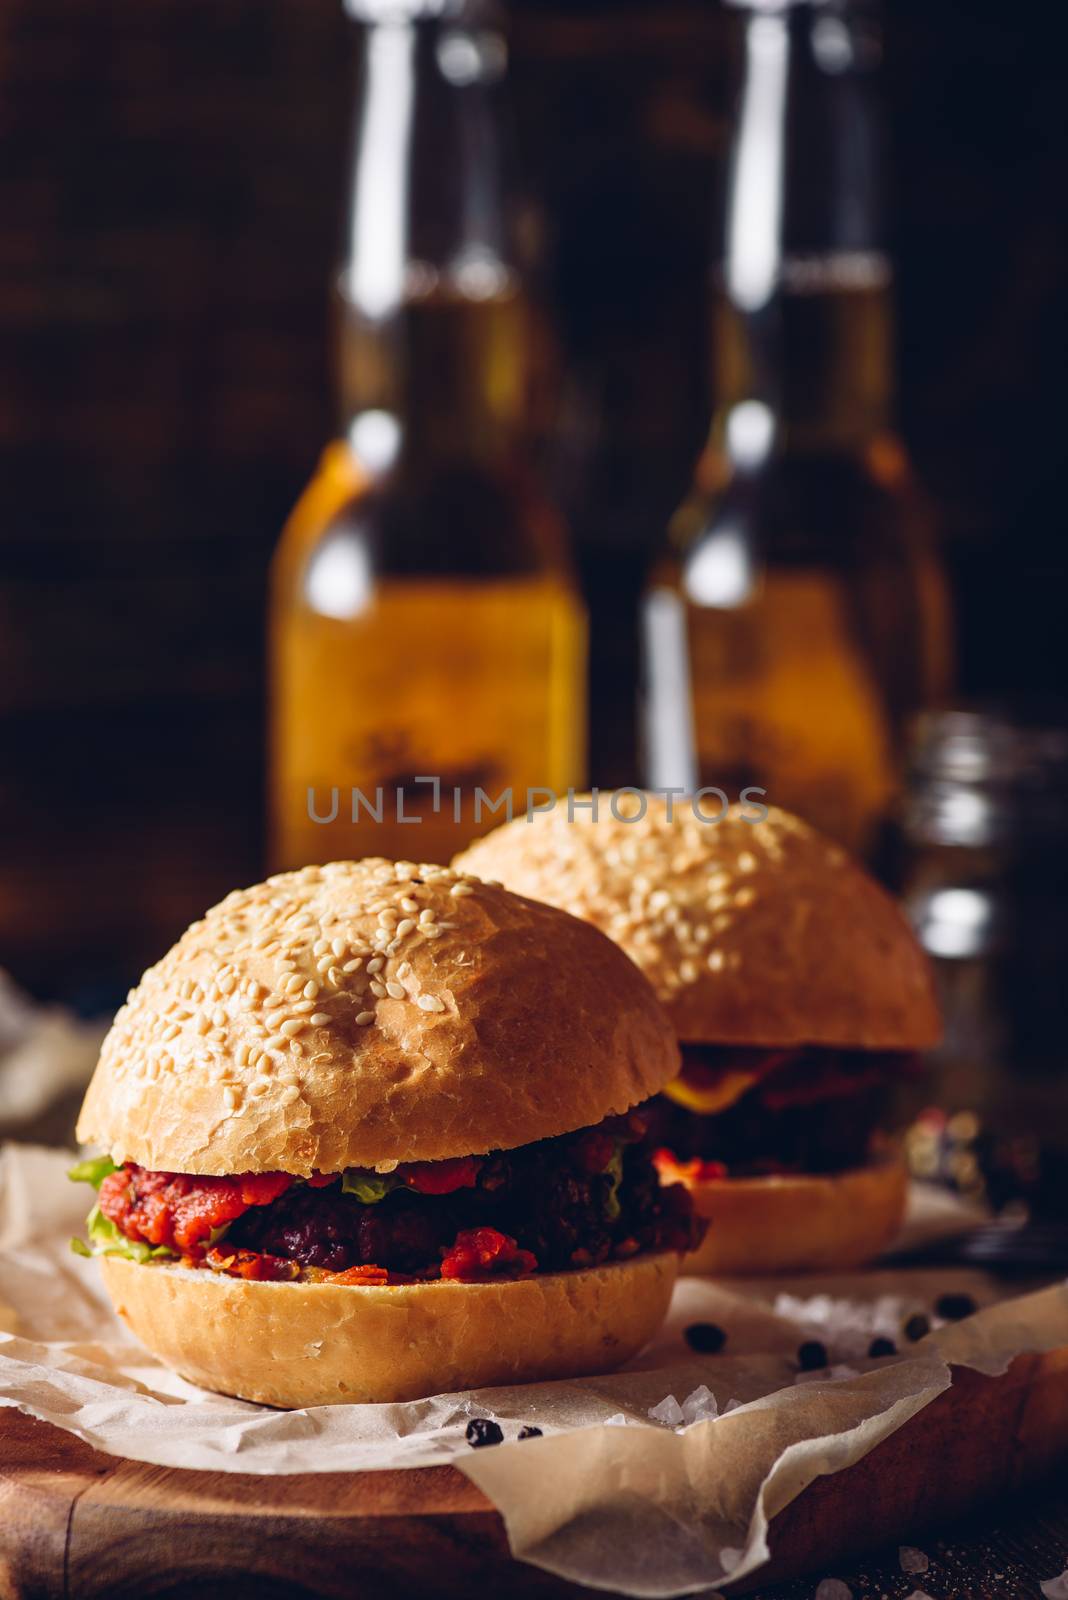 Two Cheeseburger on Cutting Board and Few Bottle of Beer on Background. Vertical Orientation.